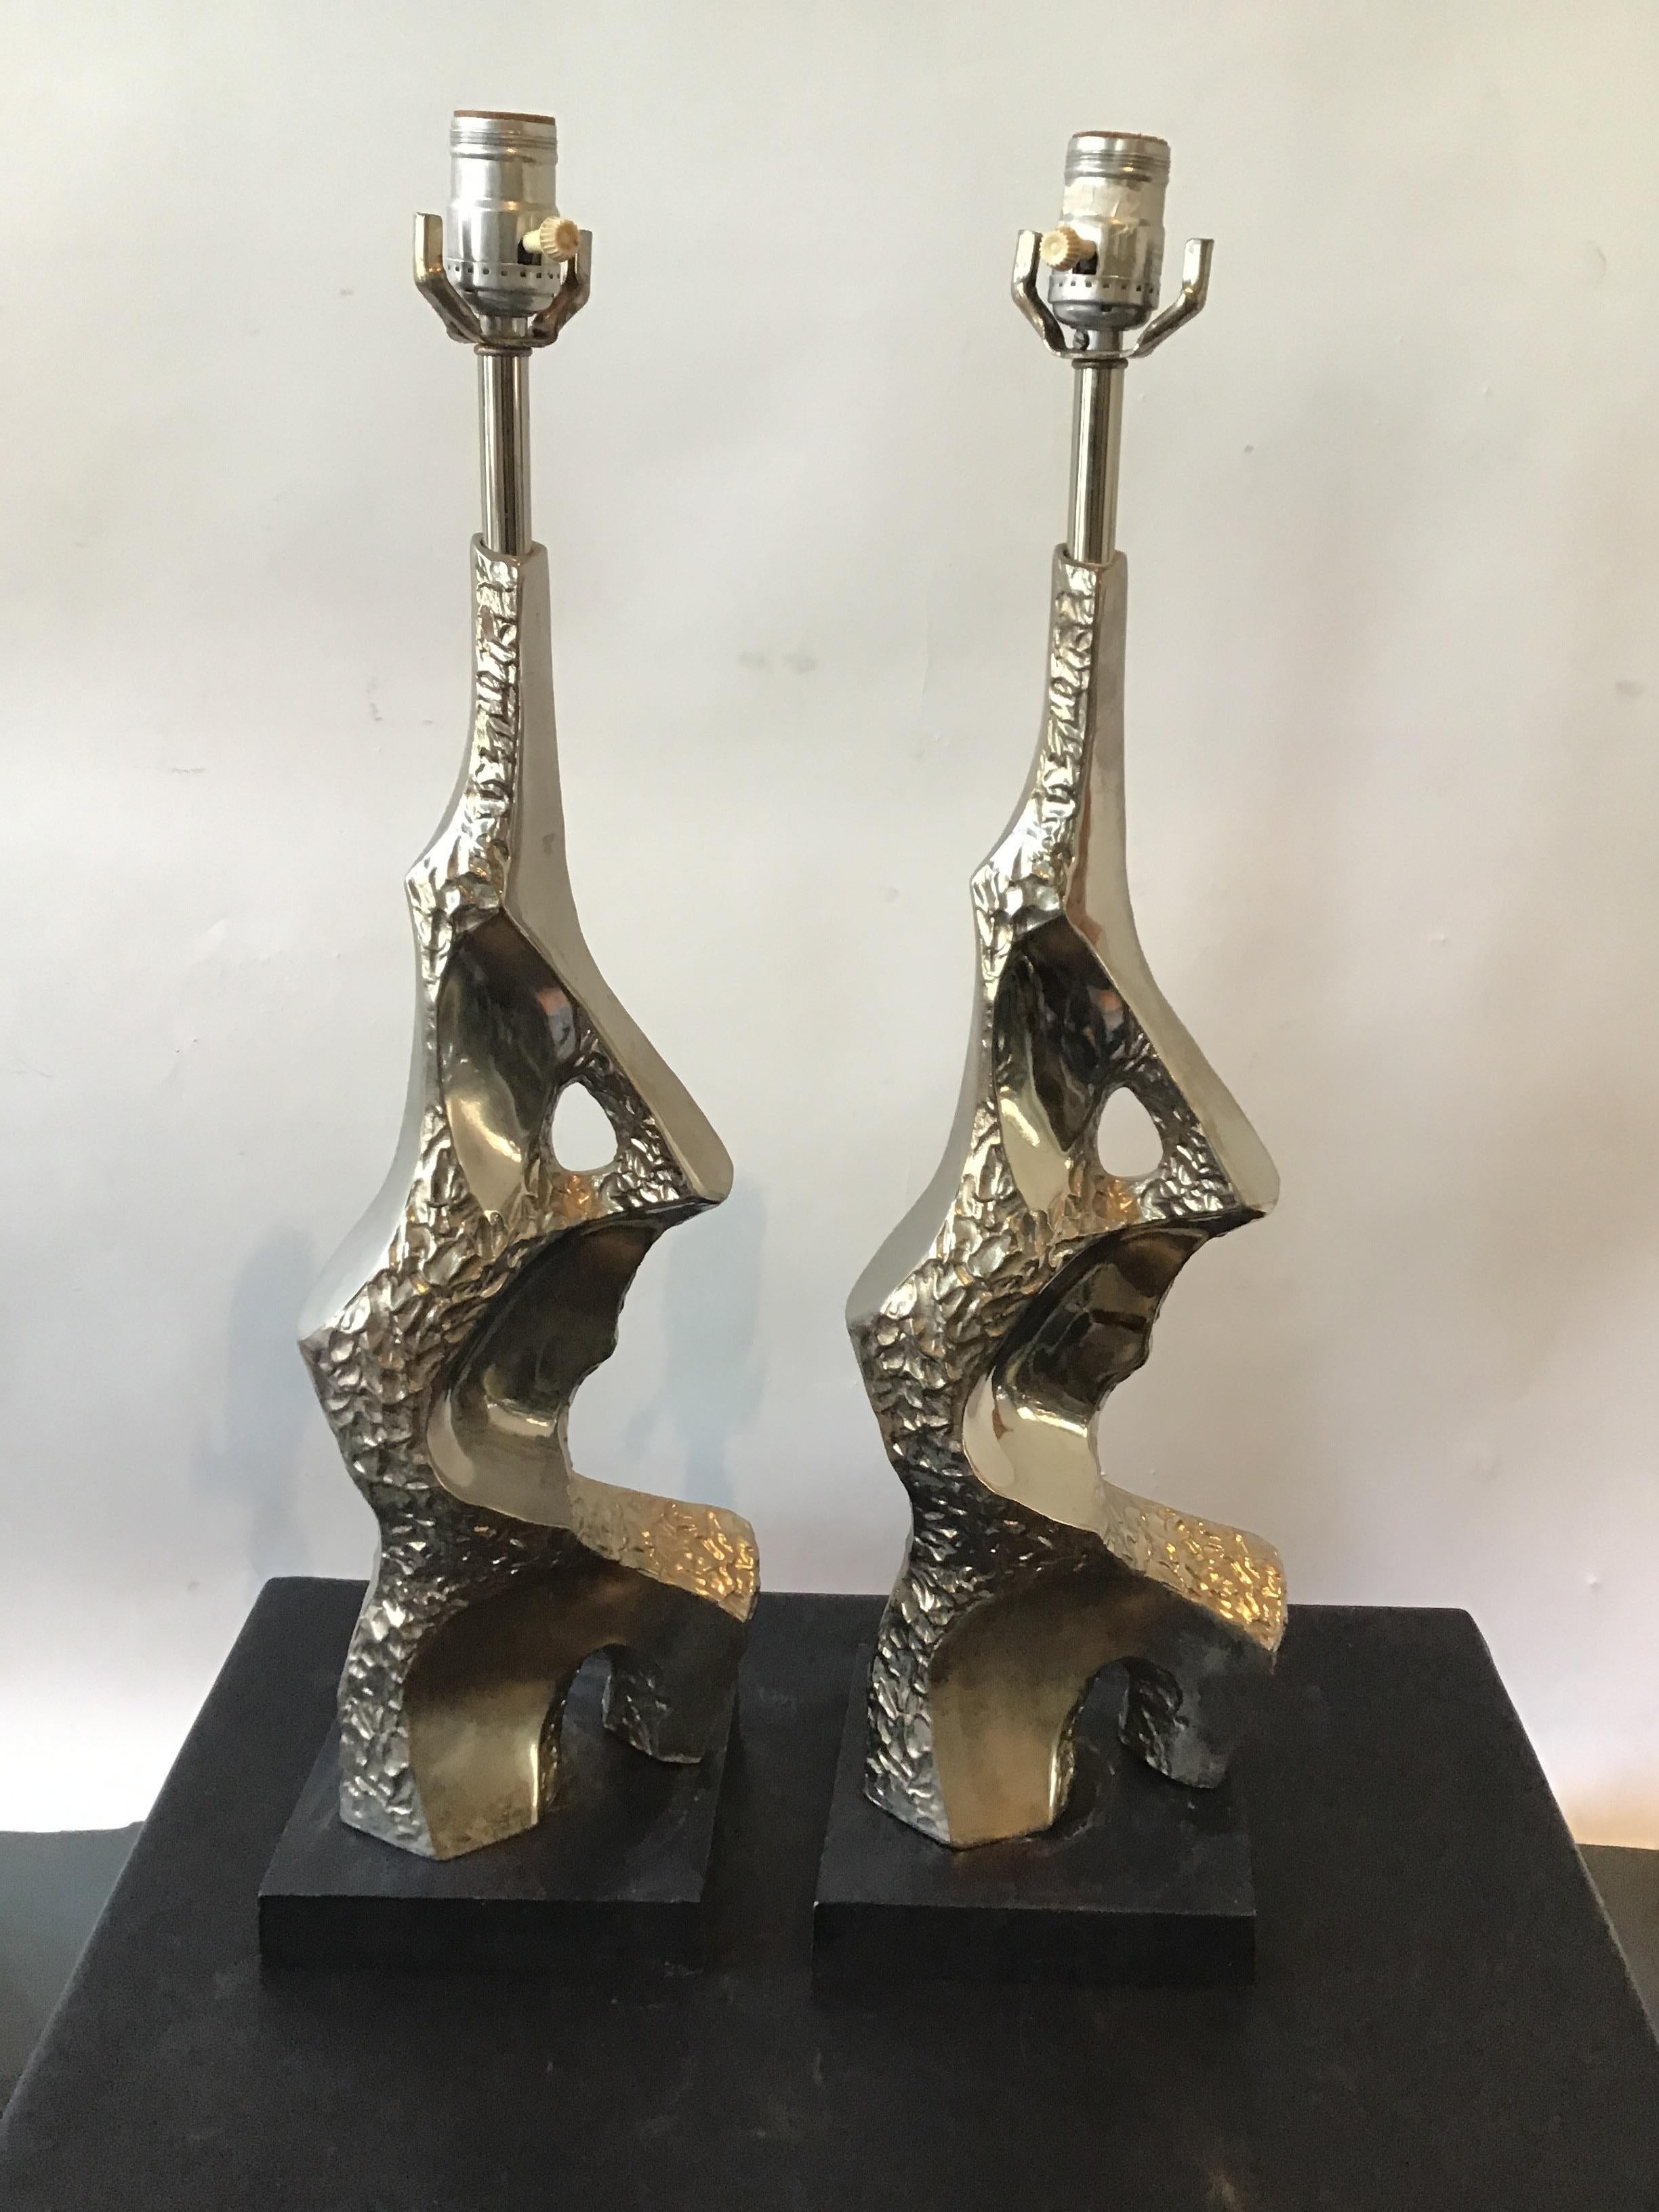 Pair of 1960s Chrome Brutalist Lamps by Richard Barr for Laurel In Good Condition For Sale In Tarrytown, NY